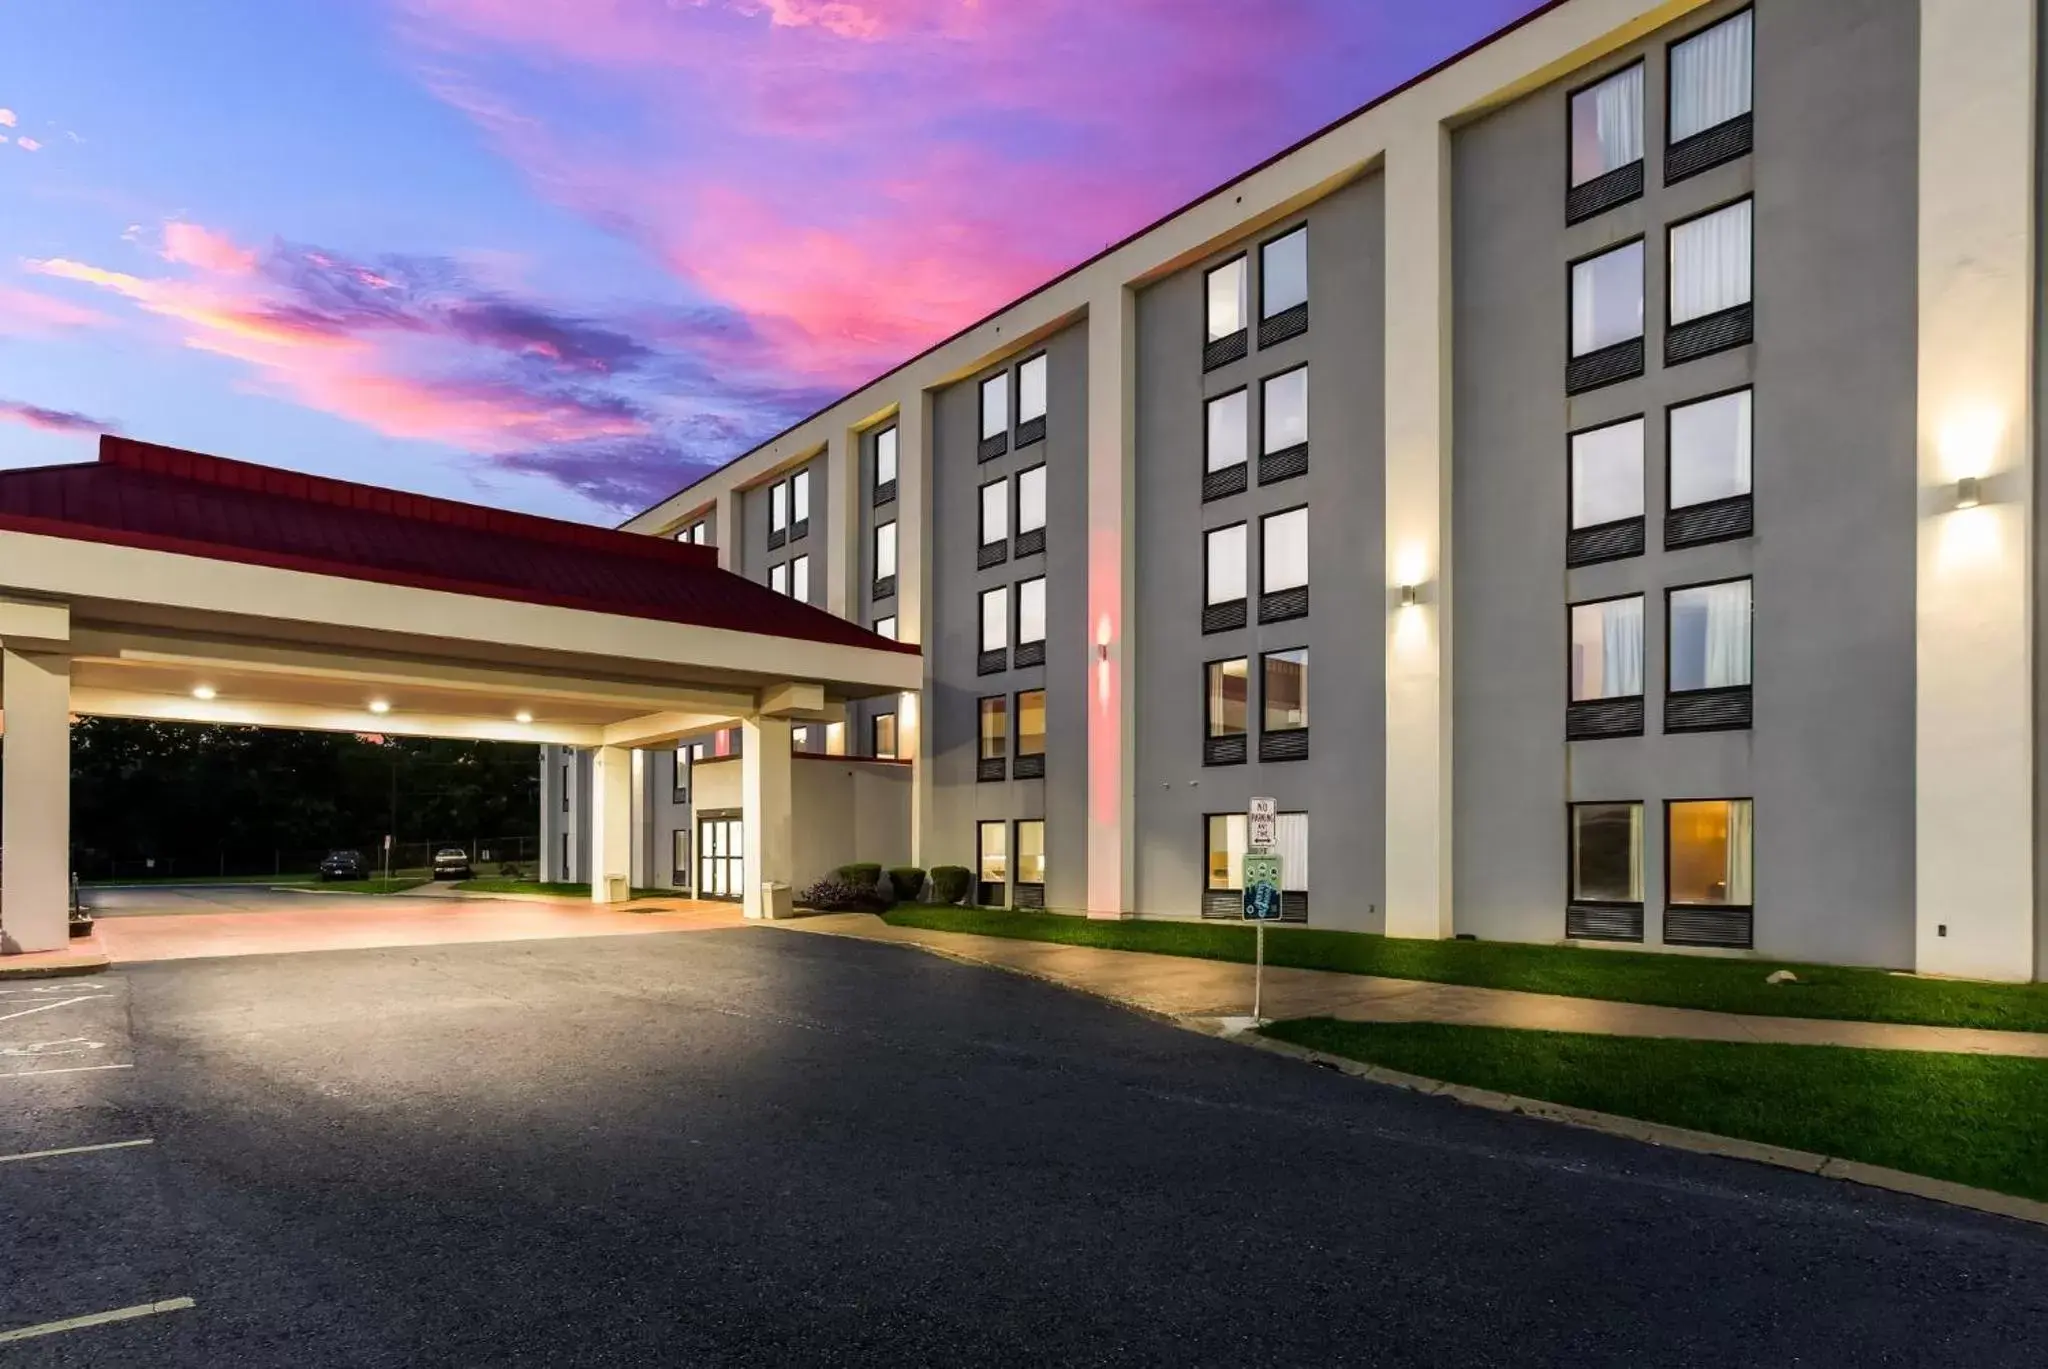 Property Building in Red Roof Inn Nashville - Music City